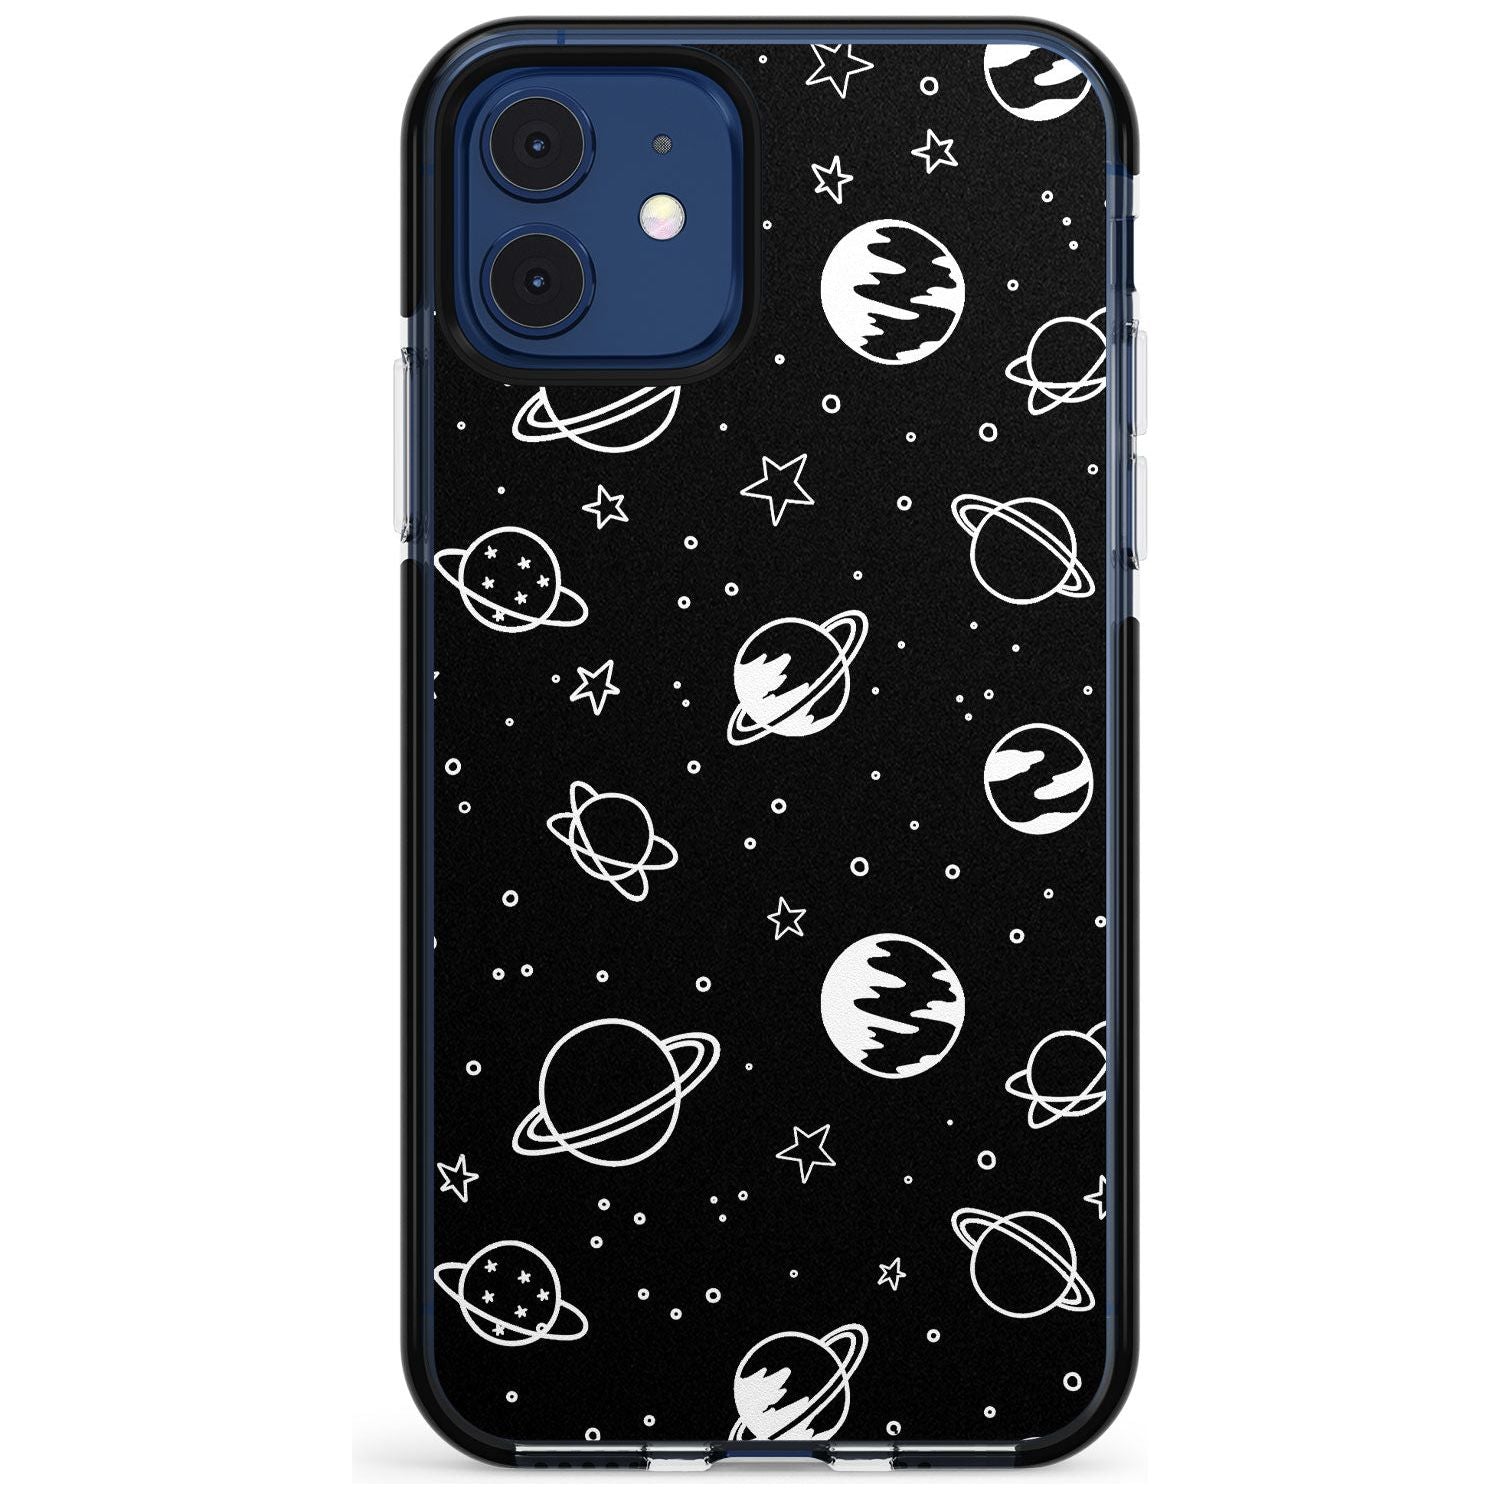 Outer Space Outlines: White on Black Pink Fade Impact Phone Case for iPhone 11 Pro Max